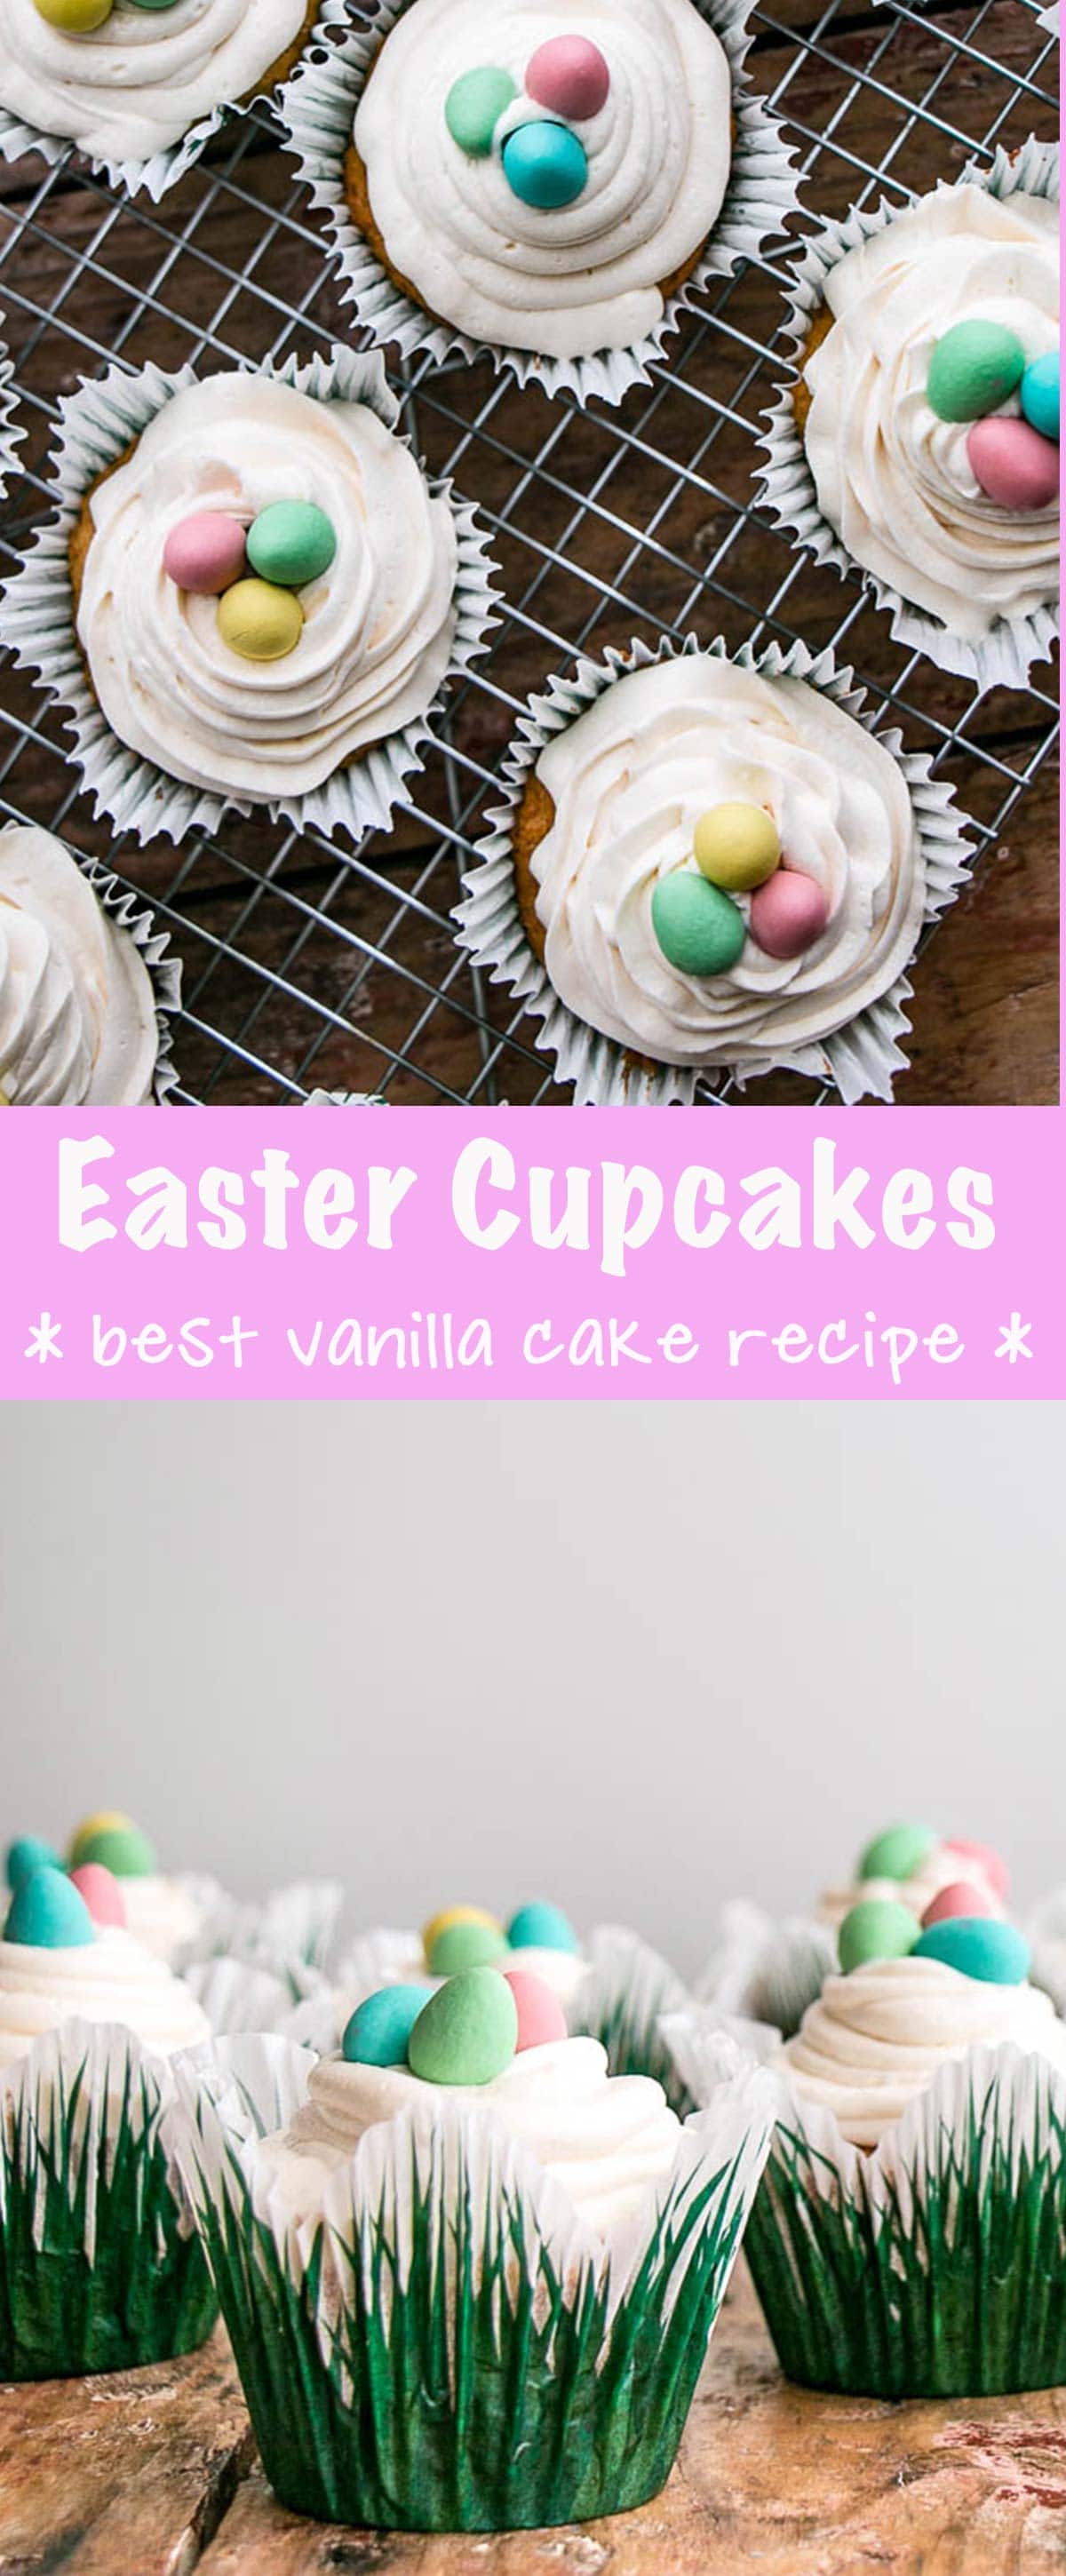 Easter Cupcakes with a moist and flavourful cupcake, vanilla frosting and Easter perfect Mini Eggs. Perfect for any bunny themed party or Easter events. via @mykitchenlove